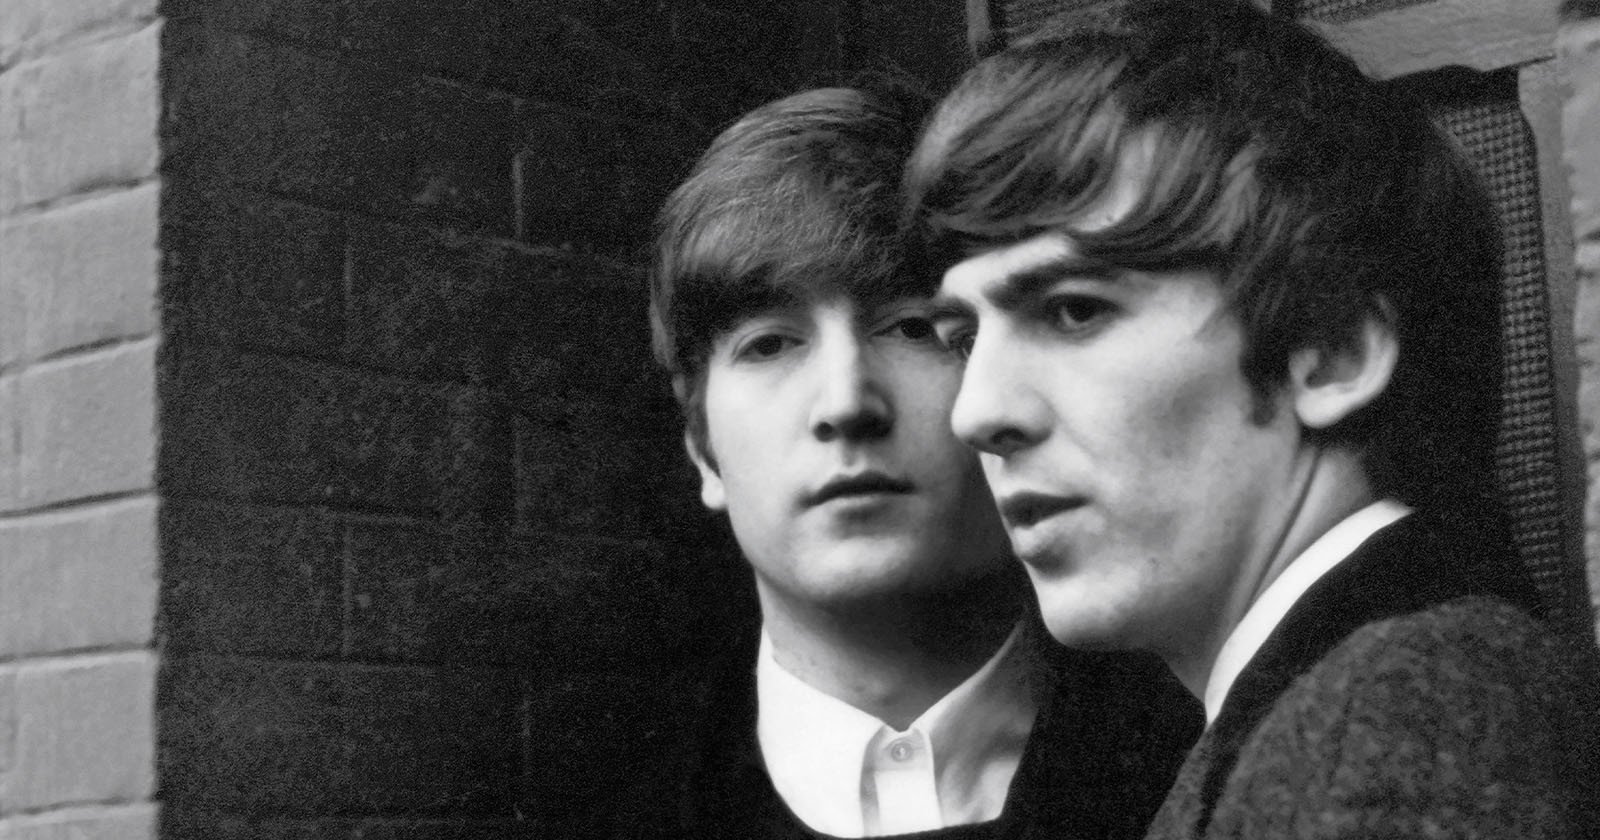  paul mccartney finds lost photos beatles from 